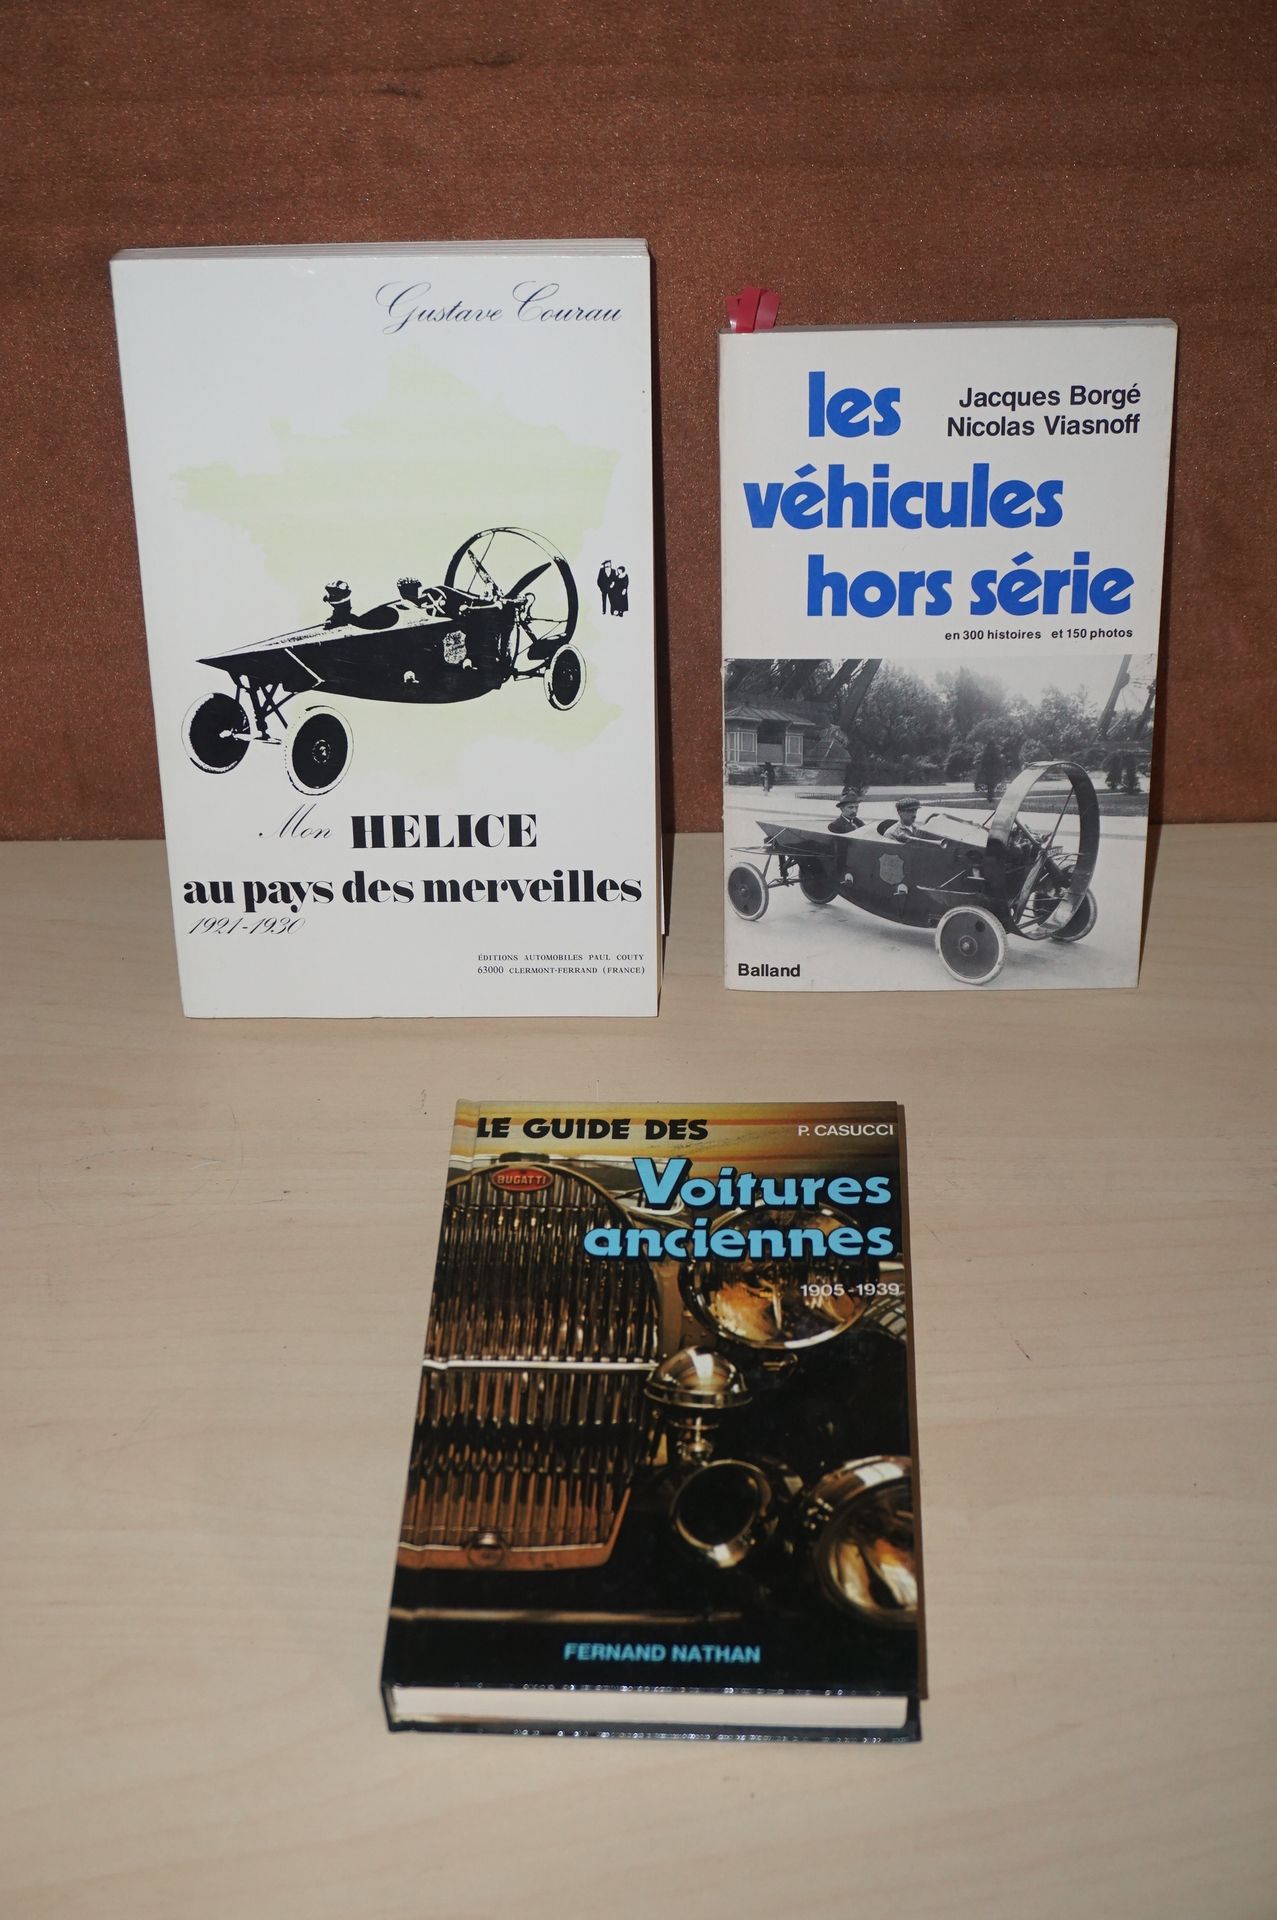 Null Set of 3 books :
- Helice in Wonderland 
- The vehicles out of series 
- Th&hellip;